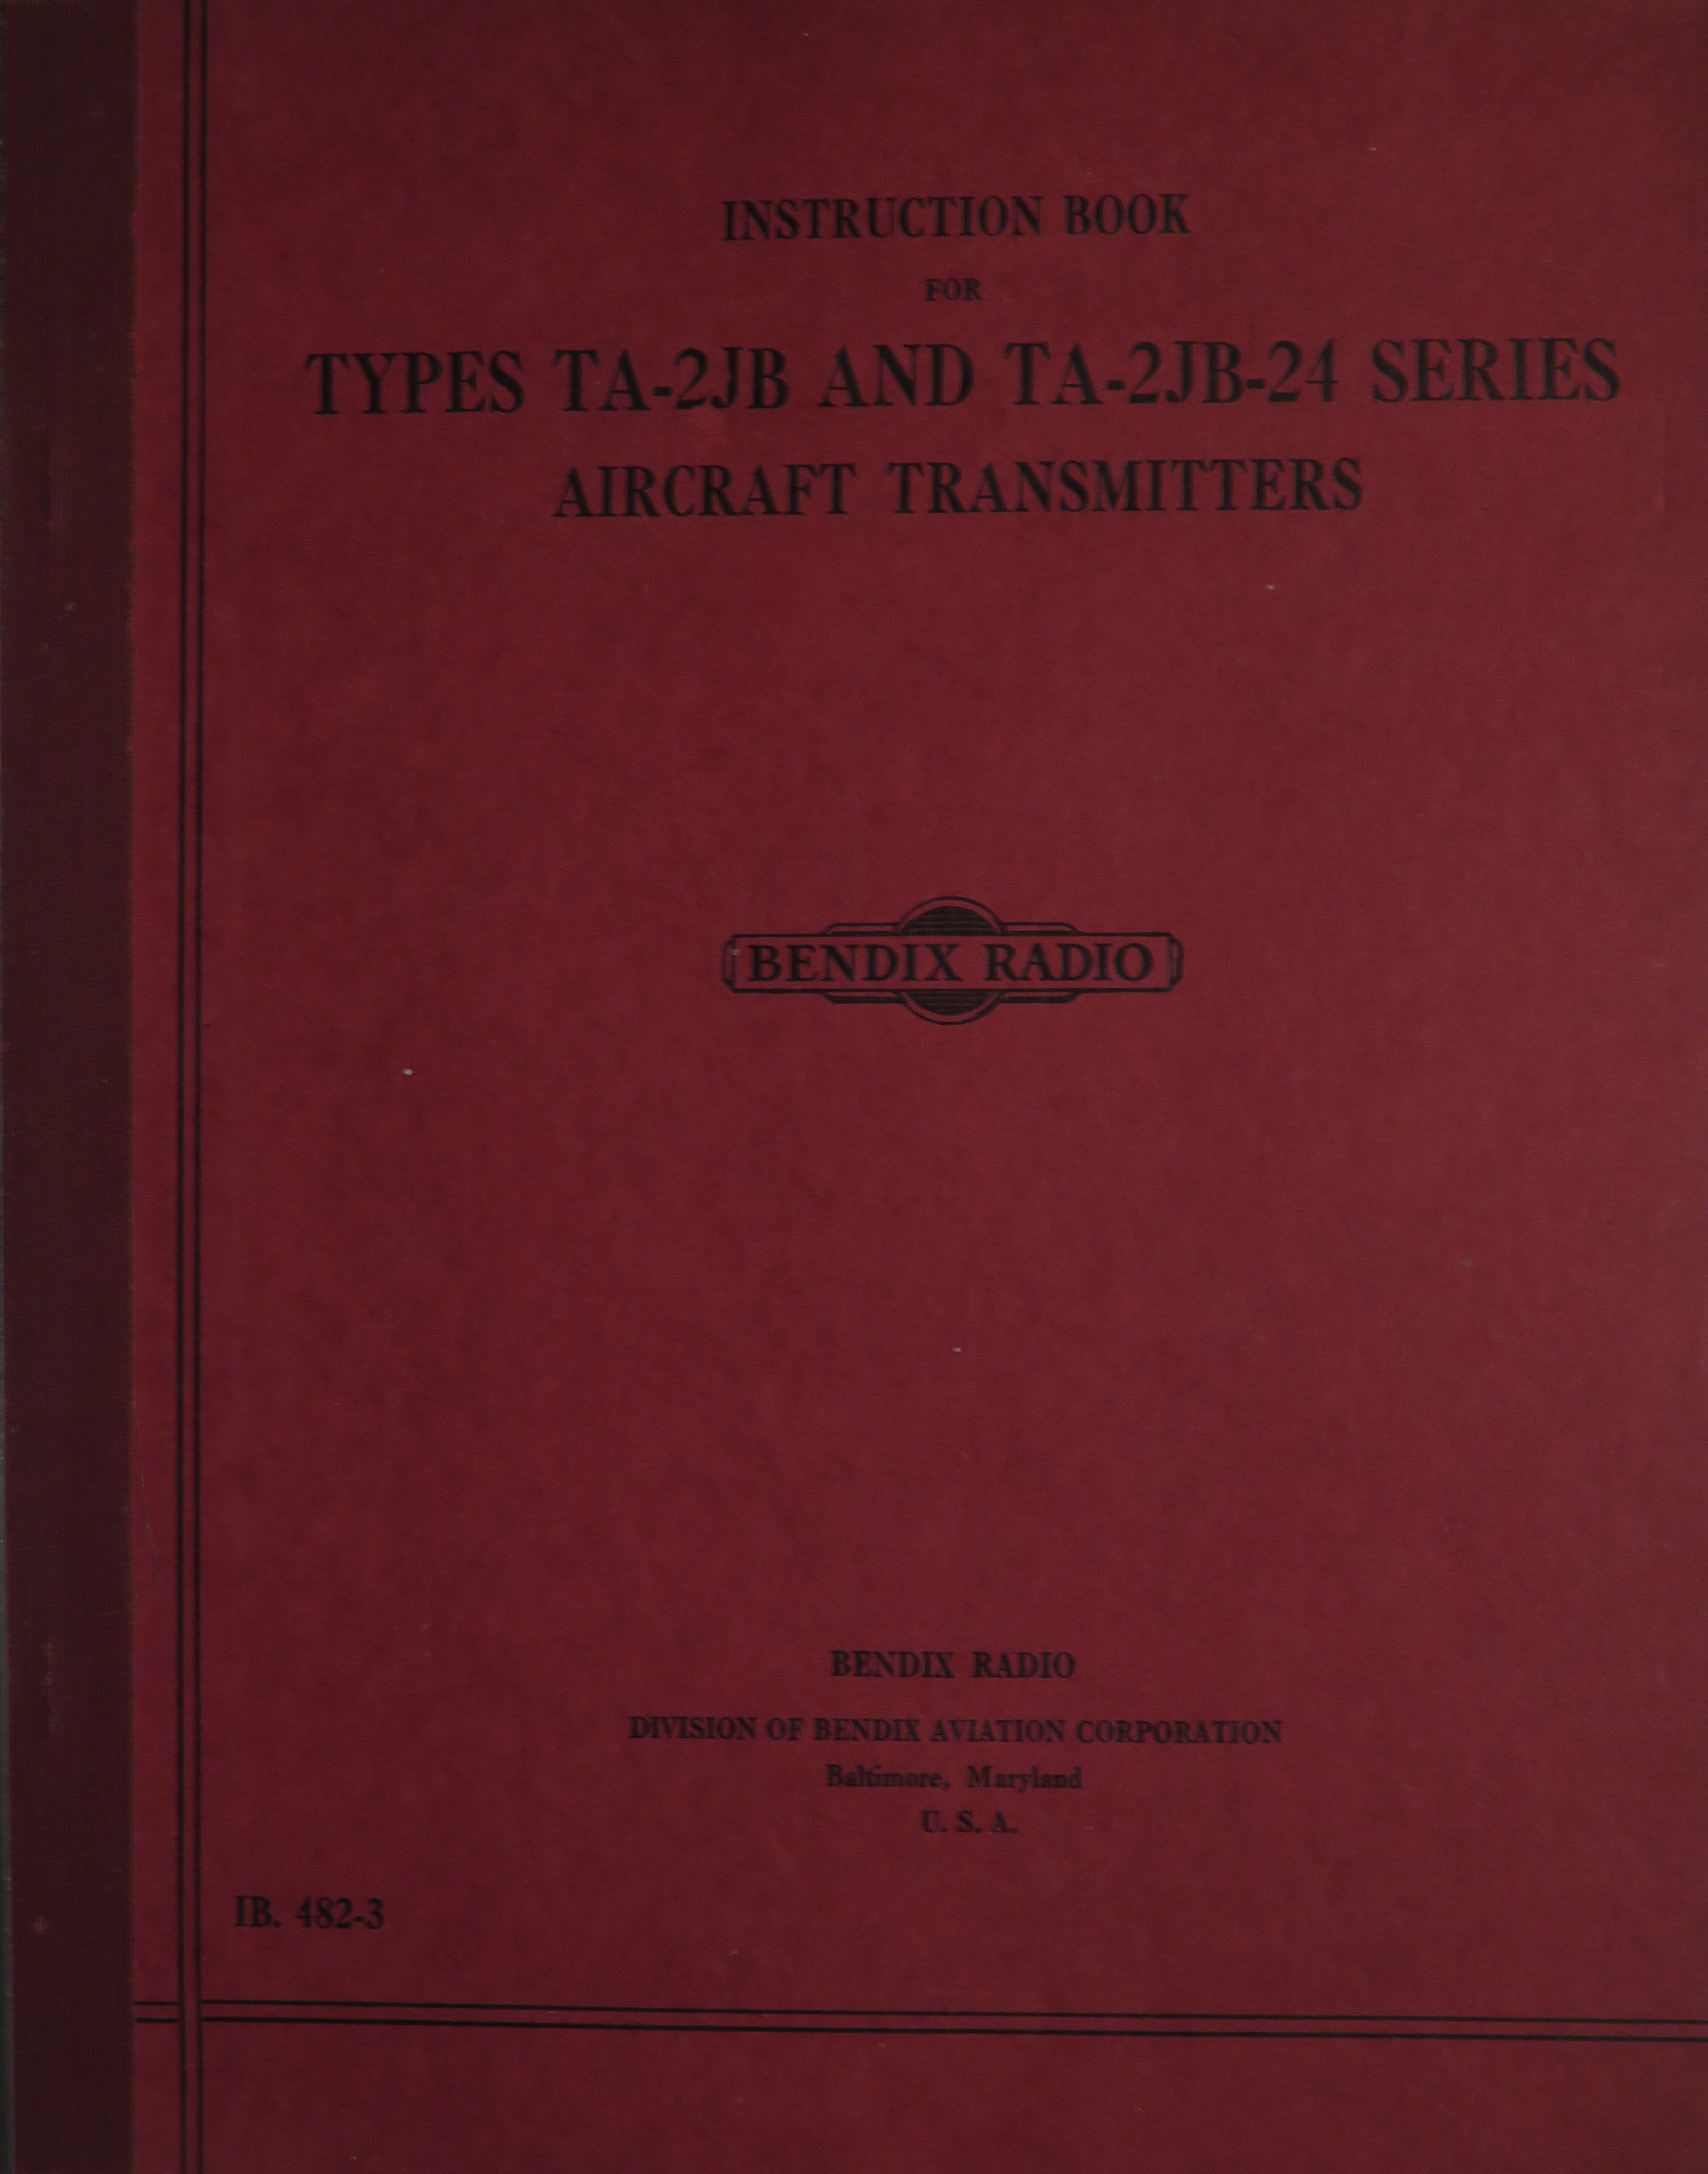 Sample page 1 from AirCorps Library document: Instruction Book for Model TA-2JB and TA-2JB-24 Series Aircraft Transmitters